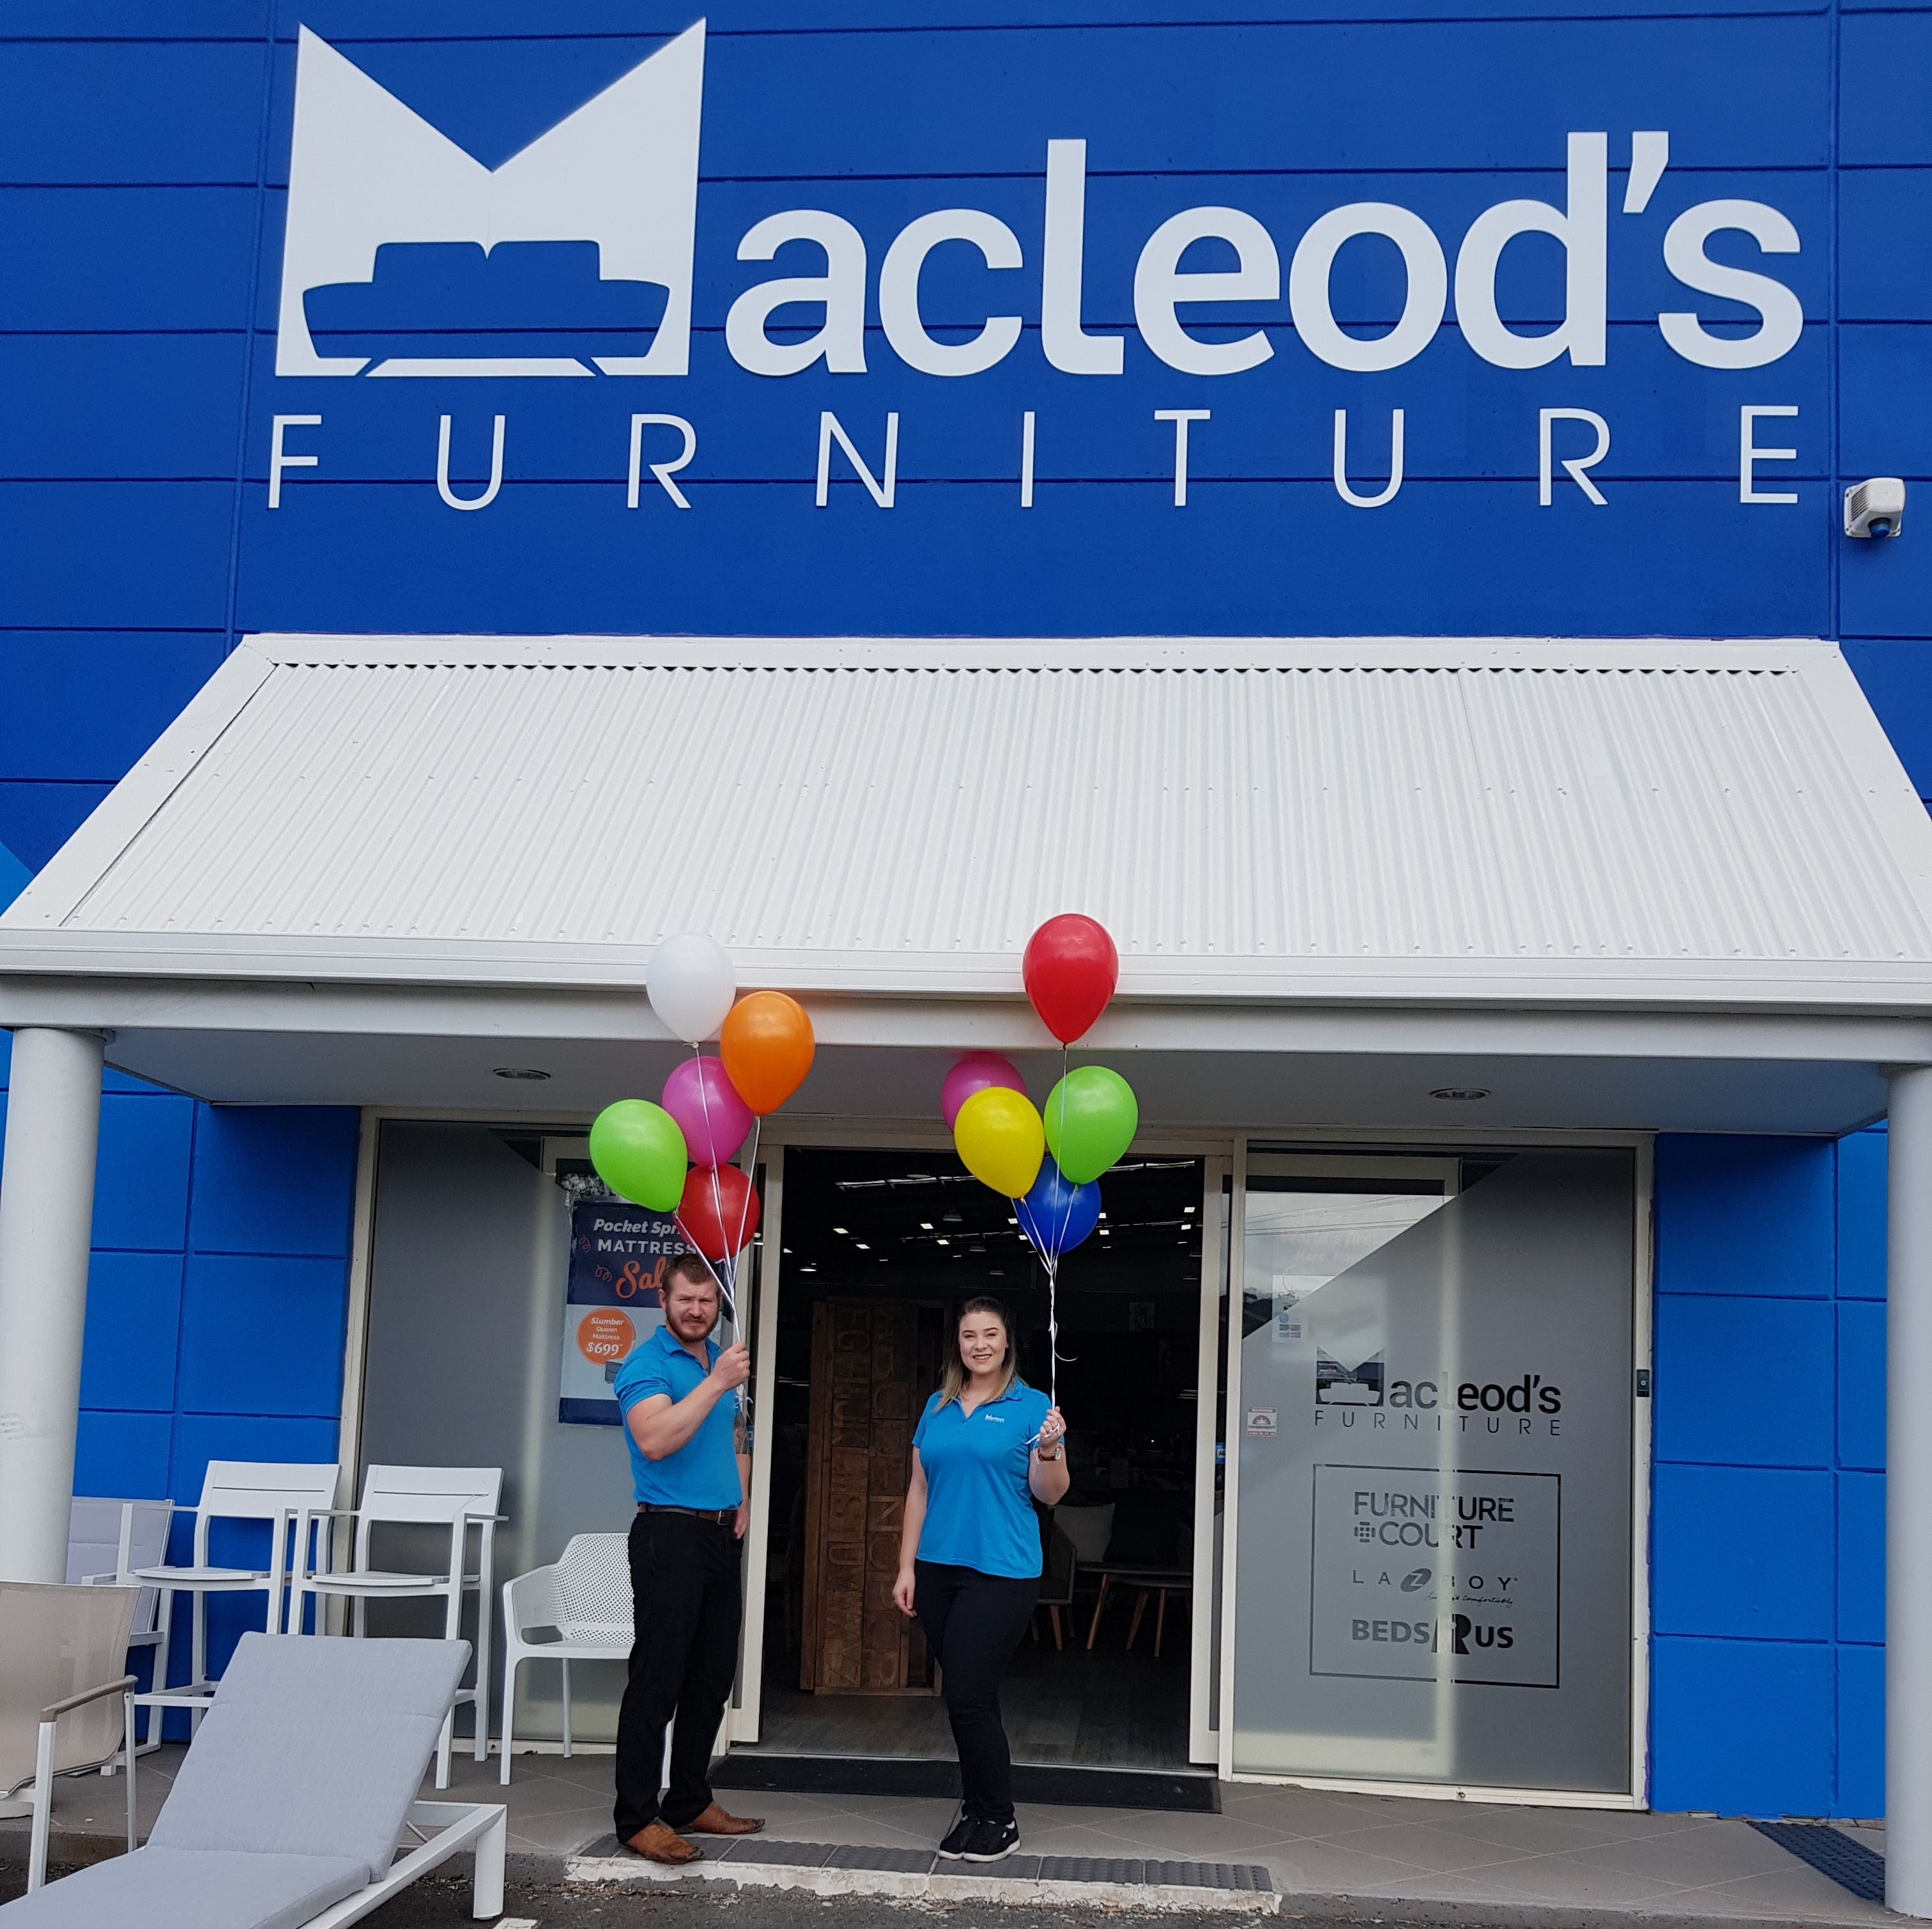 Beds R Us | Shop 2, 168 Lake Road, Port Macquarie, New South Wales 2444 | +61 2 6581 5563